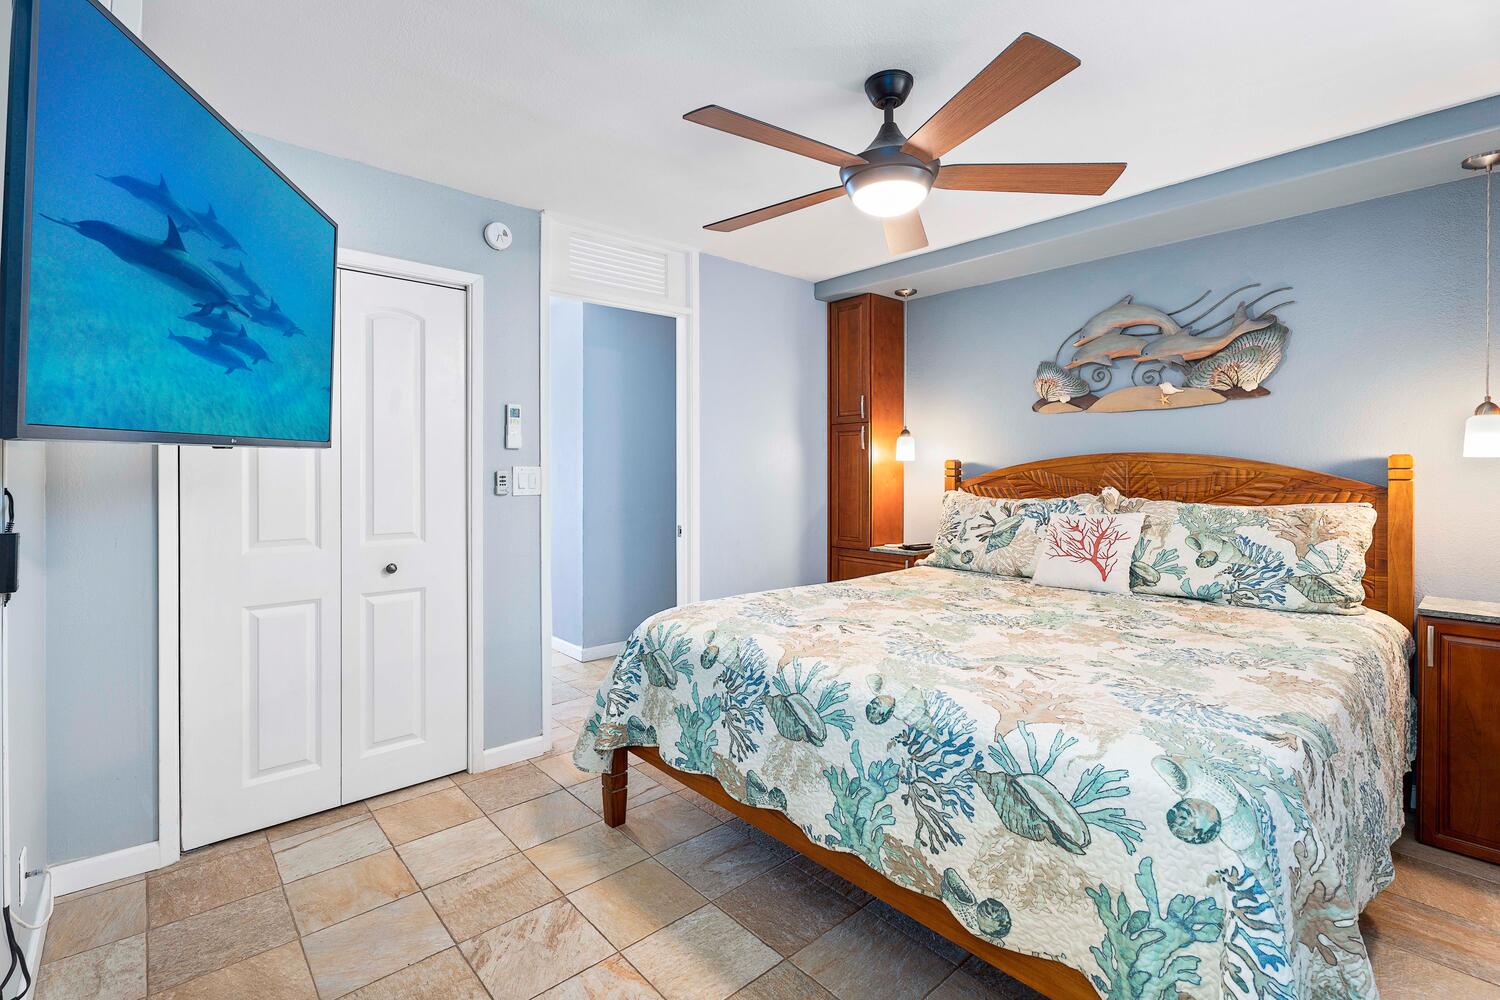 Kailua Kona Vacation Rentals, Kona Alii 403 - A bright and airy primary bedroom for a restful sleep.